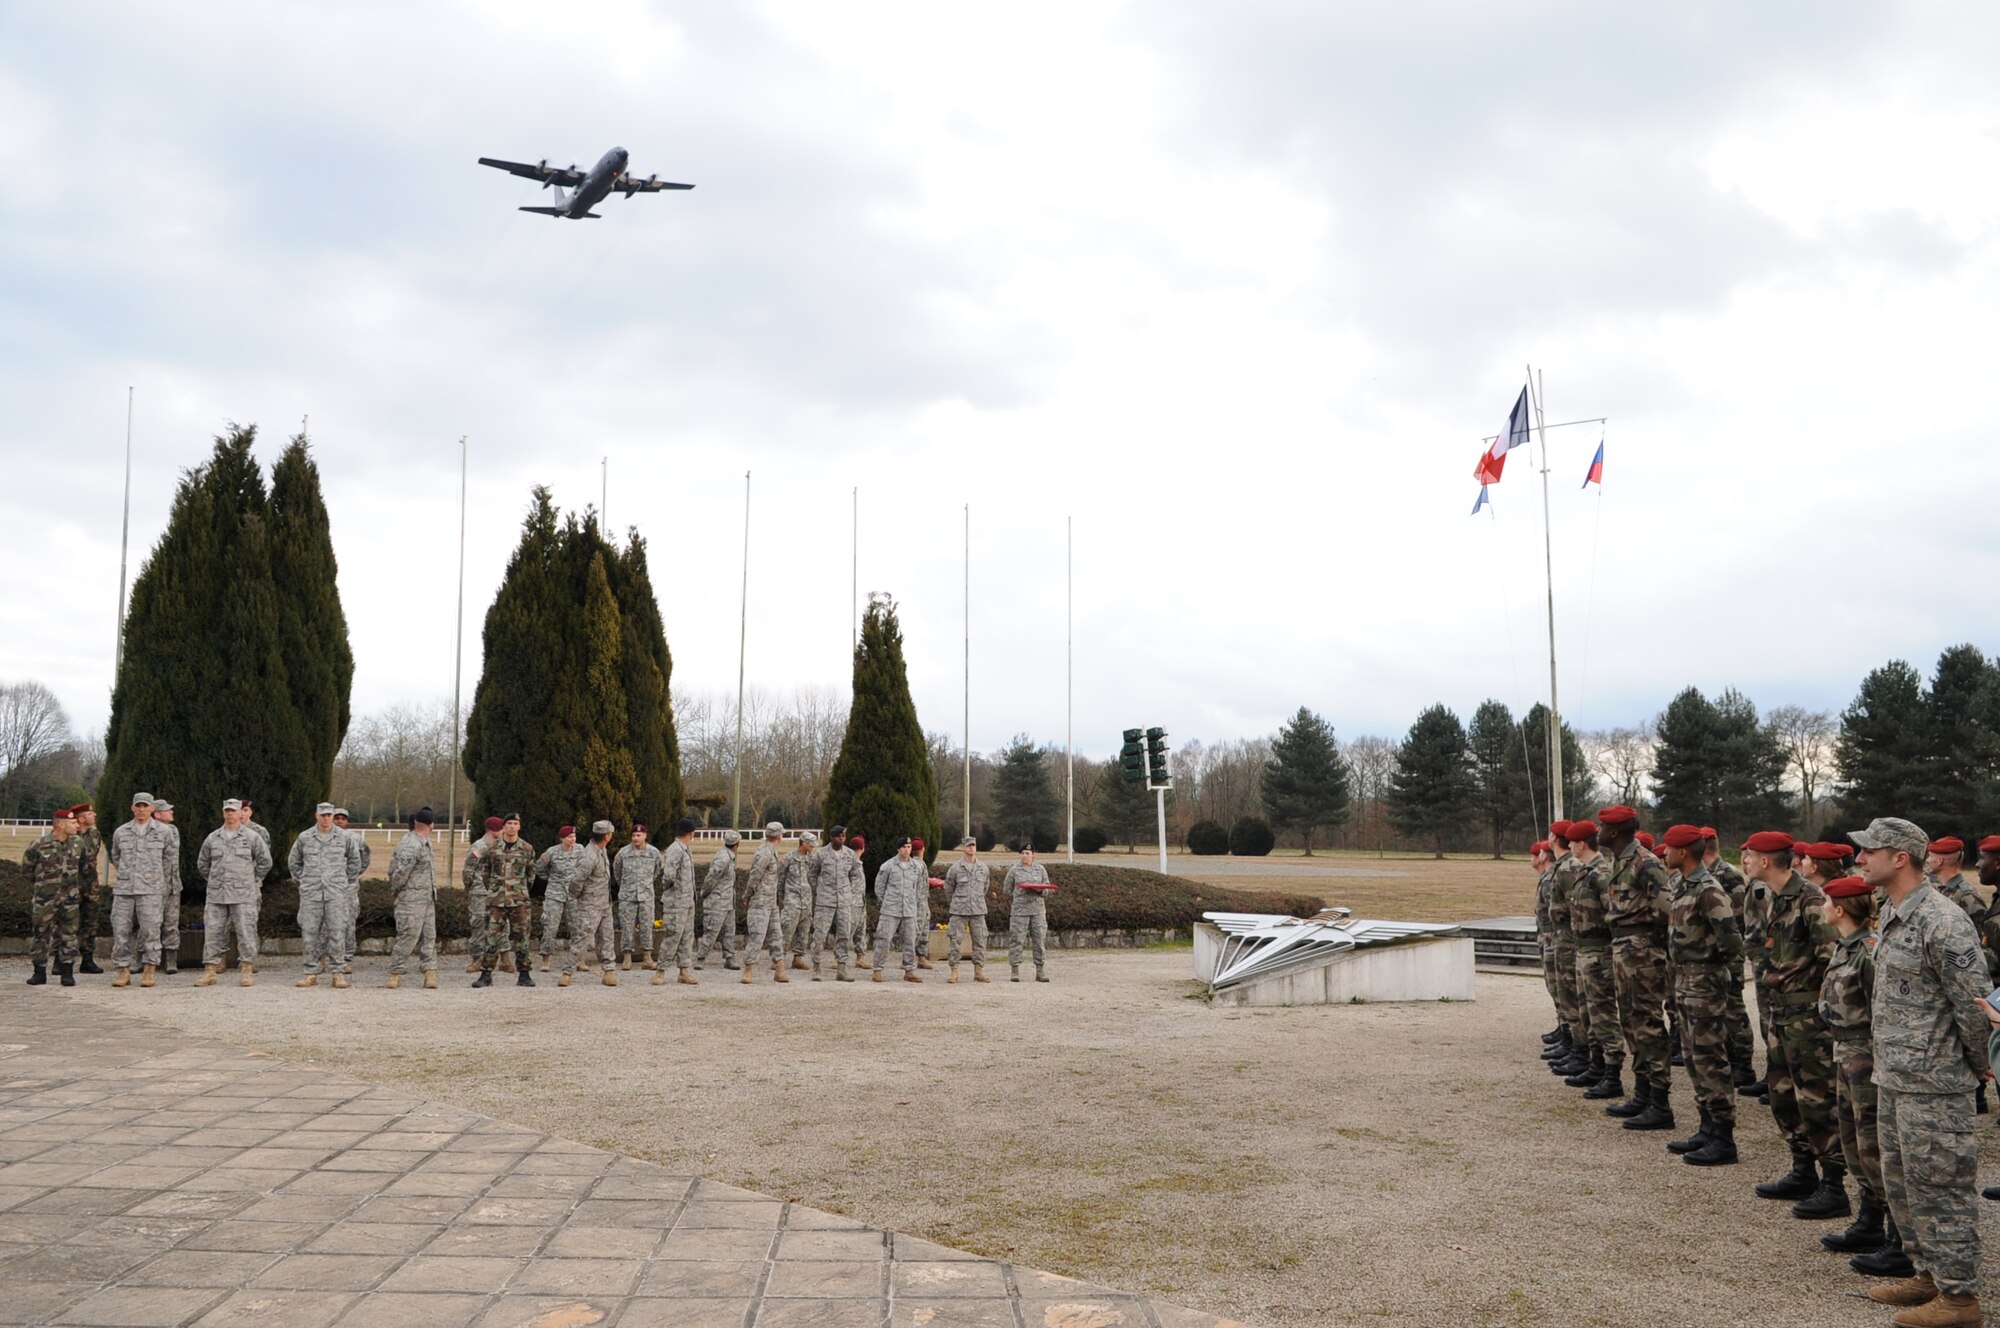 A C-130 flies over the airborne wings ceremony prior to them receiving their wings at École des troupes aéroportées (ETAP) Pau, France, March 4, 2010. Members of the 435th Contingency Response Group and the 5th Quartermaster Company joined with their French military counterparts for a week of training at the École des troupes aéroportées (ETAP), or School of Airborne Troops, a military school dedicated to training the military paratroopers  the French army, located in the town of Pau, in the département of Pyrénées-Atlantiques, France.  The ETAP is responsible for training paratroopers, and for international cooperation and promotion of paratroop culture. (U.S. Air Force photo by Airman 1st Class Caleb Pierce)